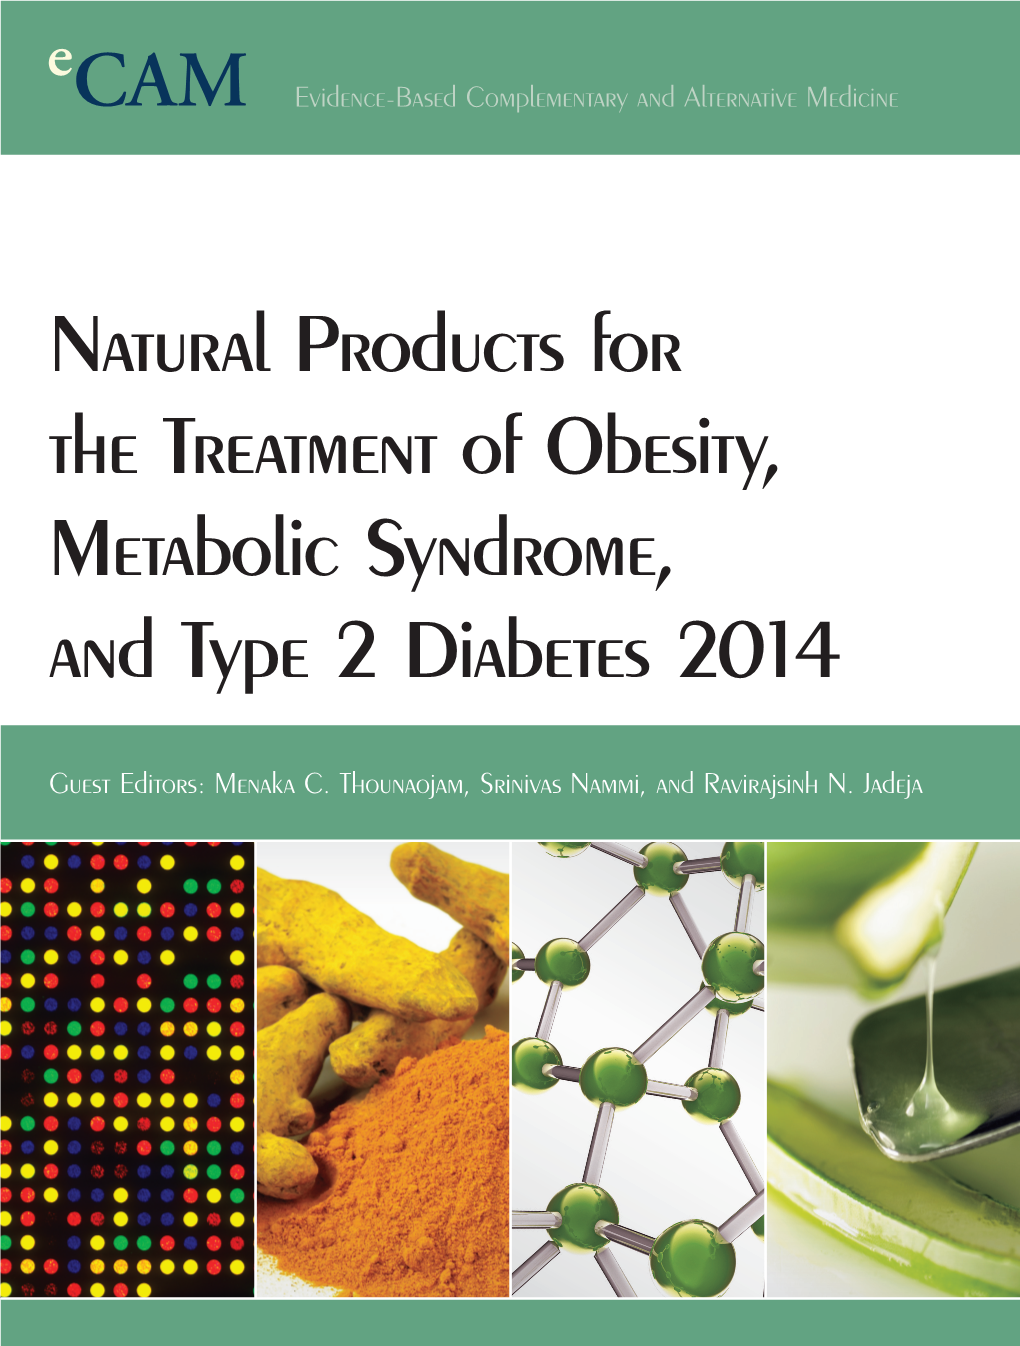 Natural Products for the Treatment of Obesity, Metabolic Syndrome, and Type 2 Diabetes 2014